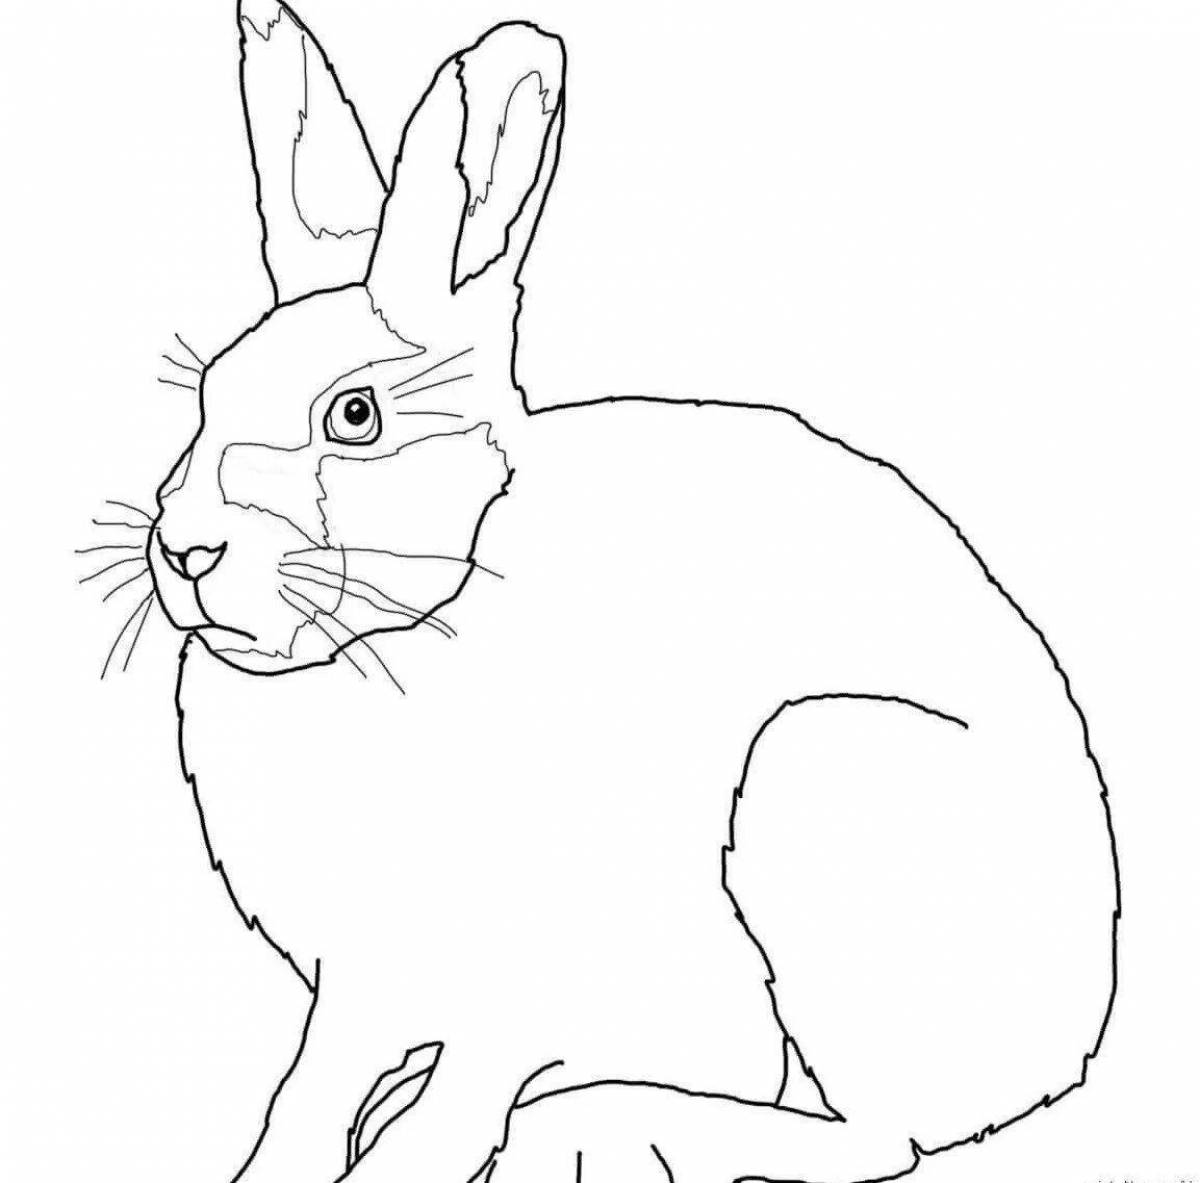 Coloring book charming hare